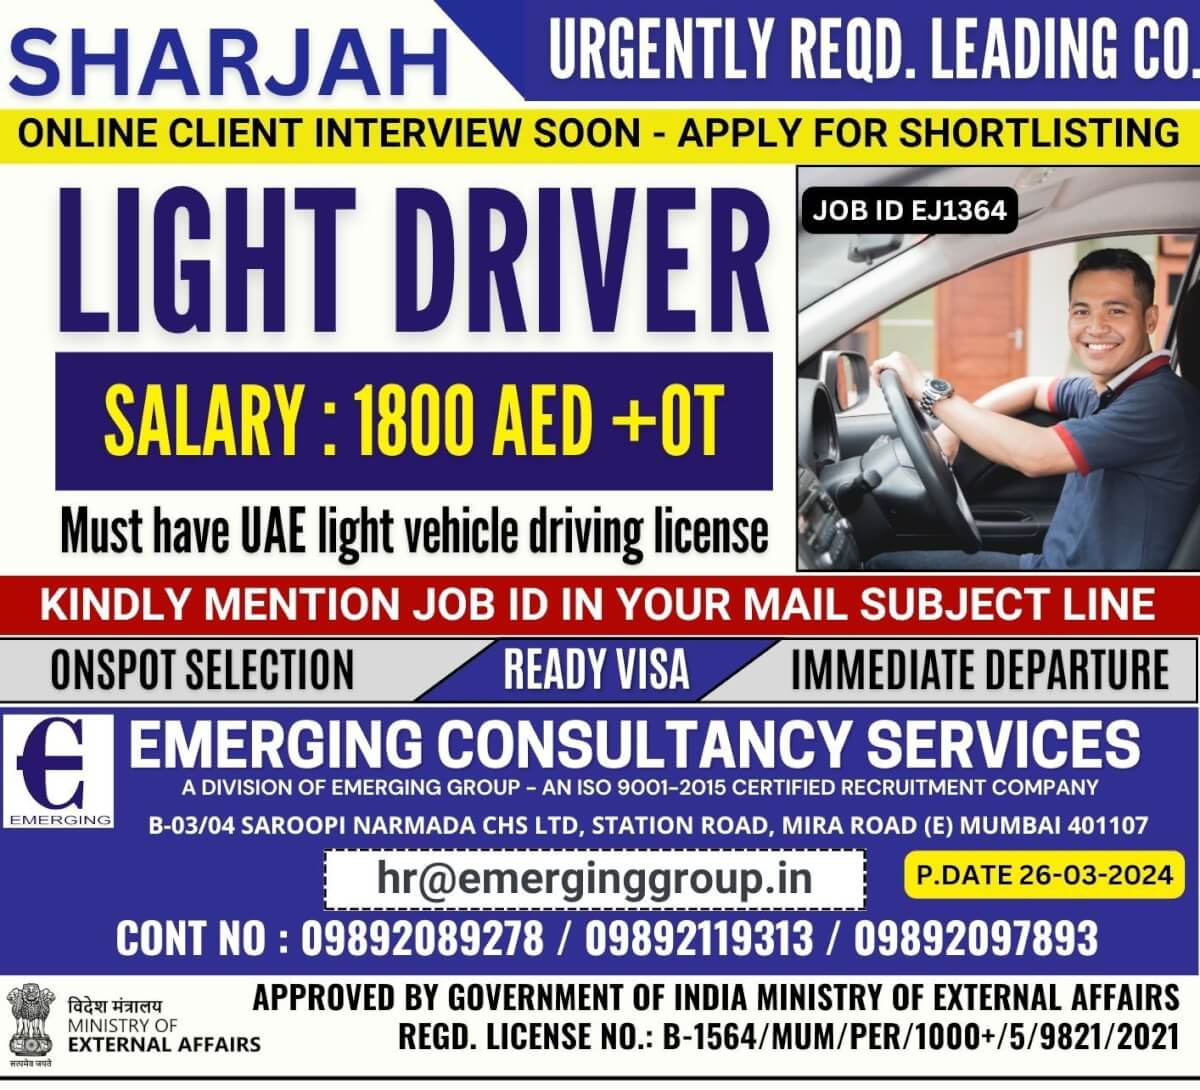 URGENTLY REQD. LEADING COMPANY IN SHARJAH